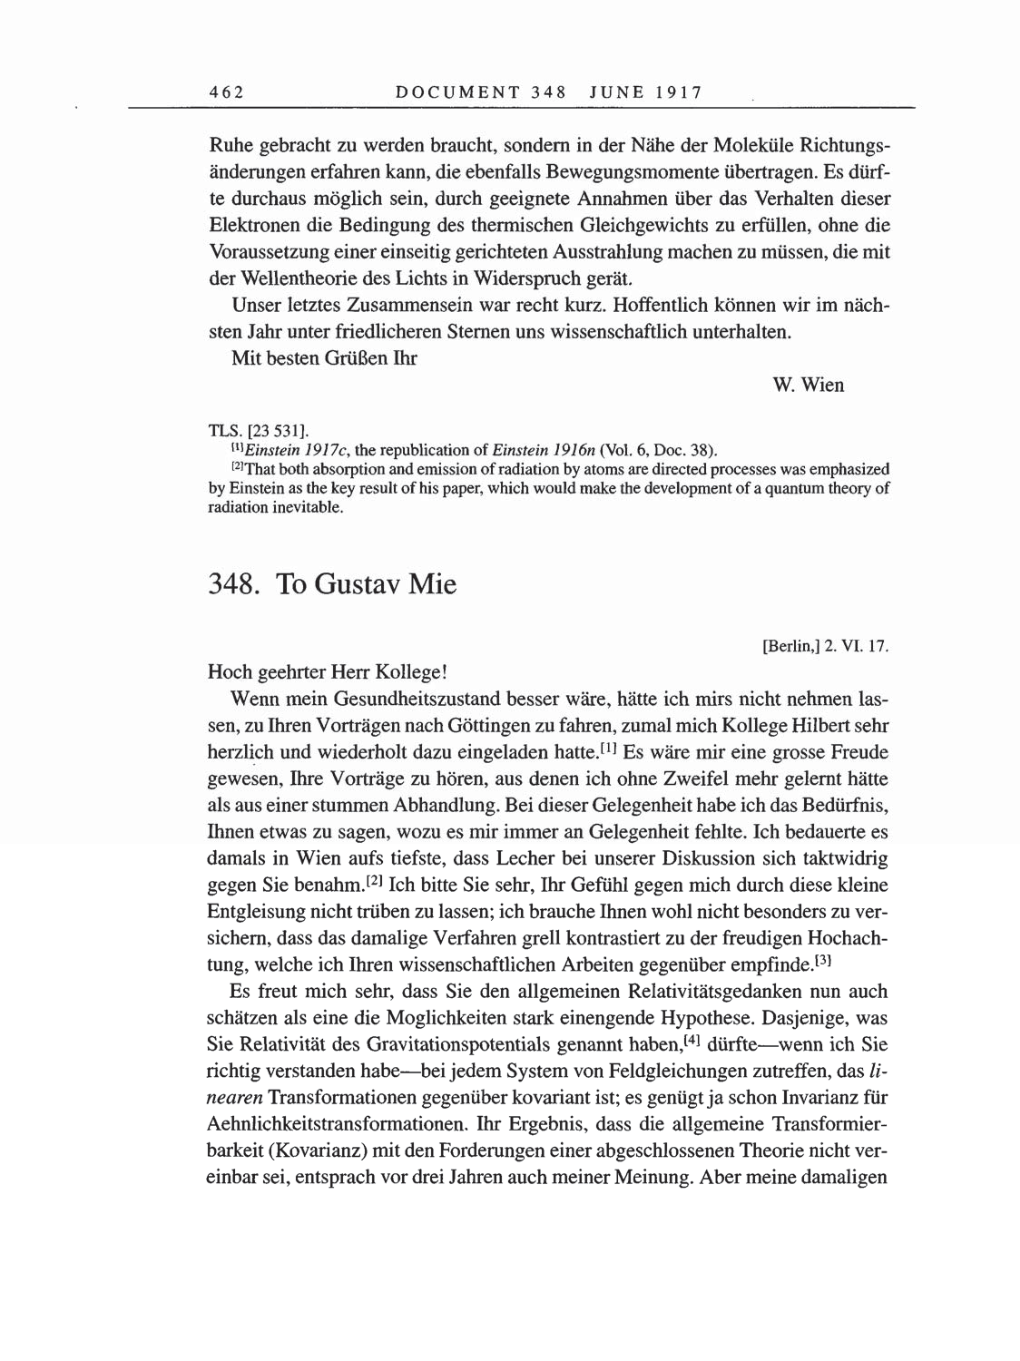 Volume 8, Part A: The Berlin Years: Correspondence 1914-1917 page 462